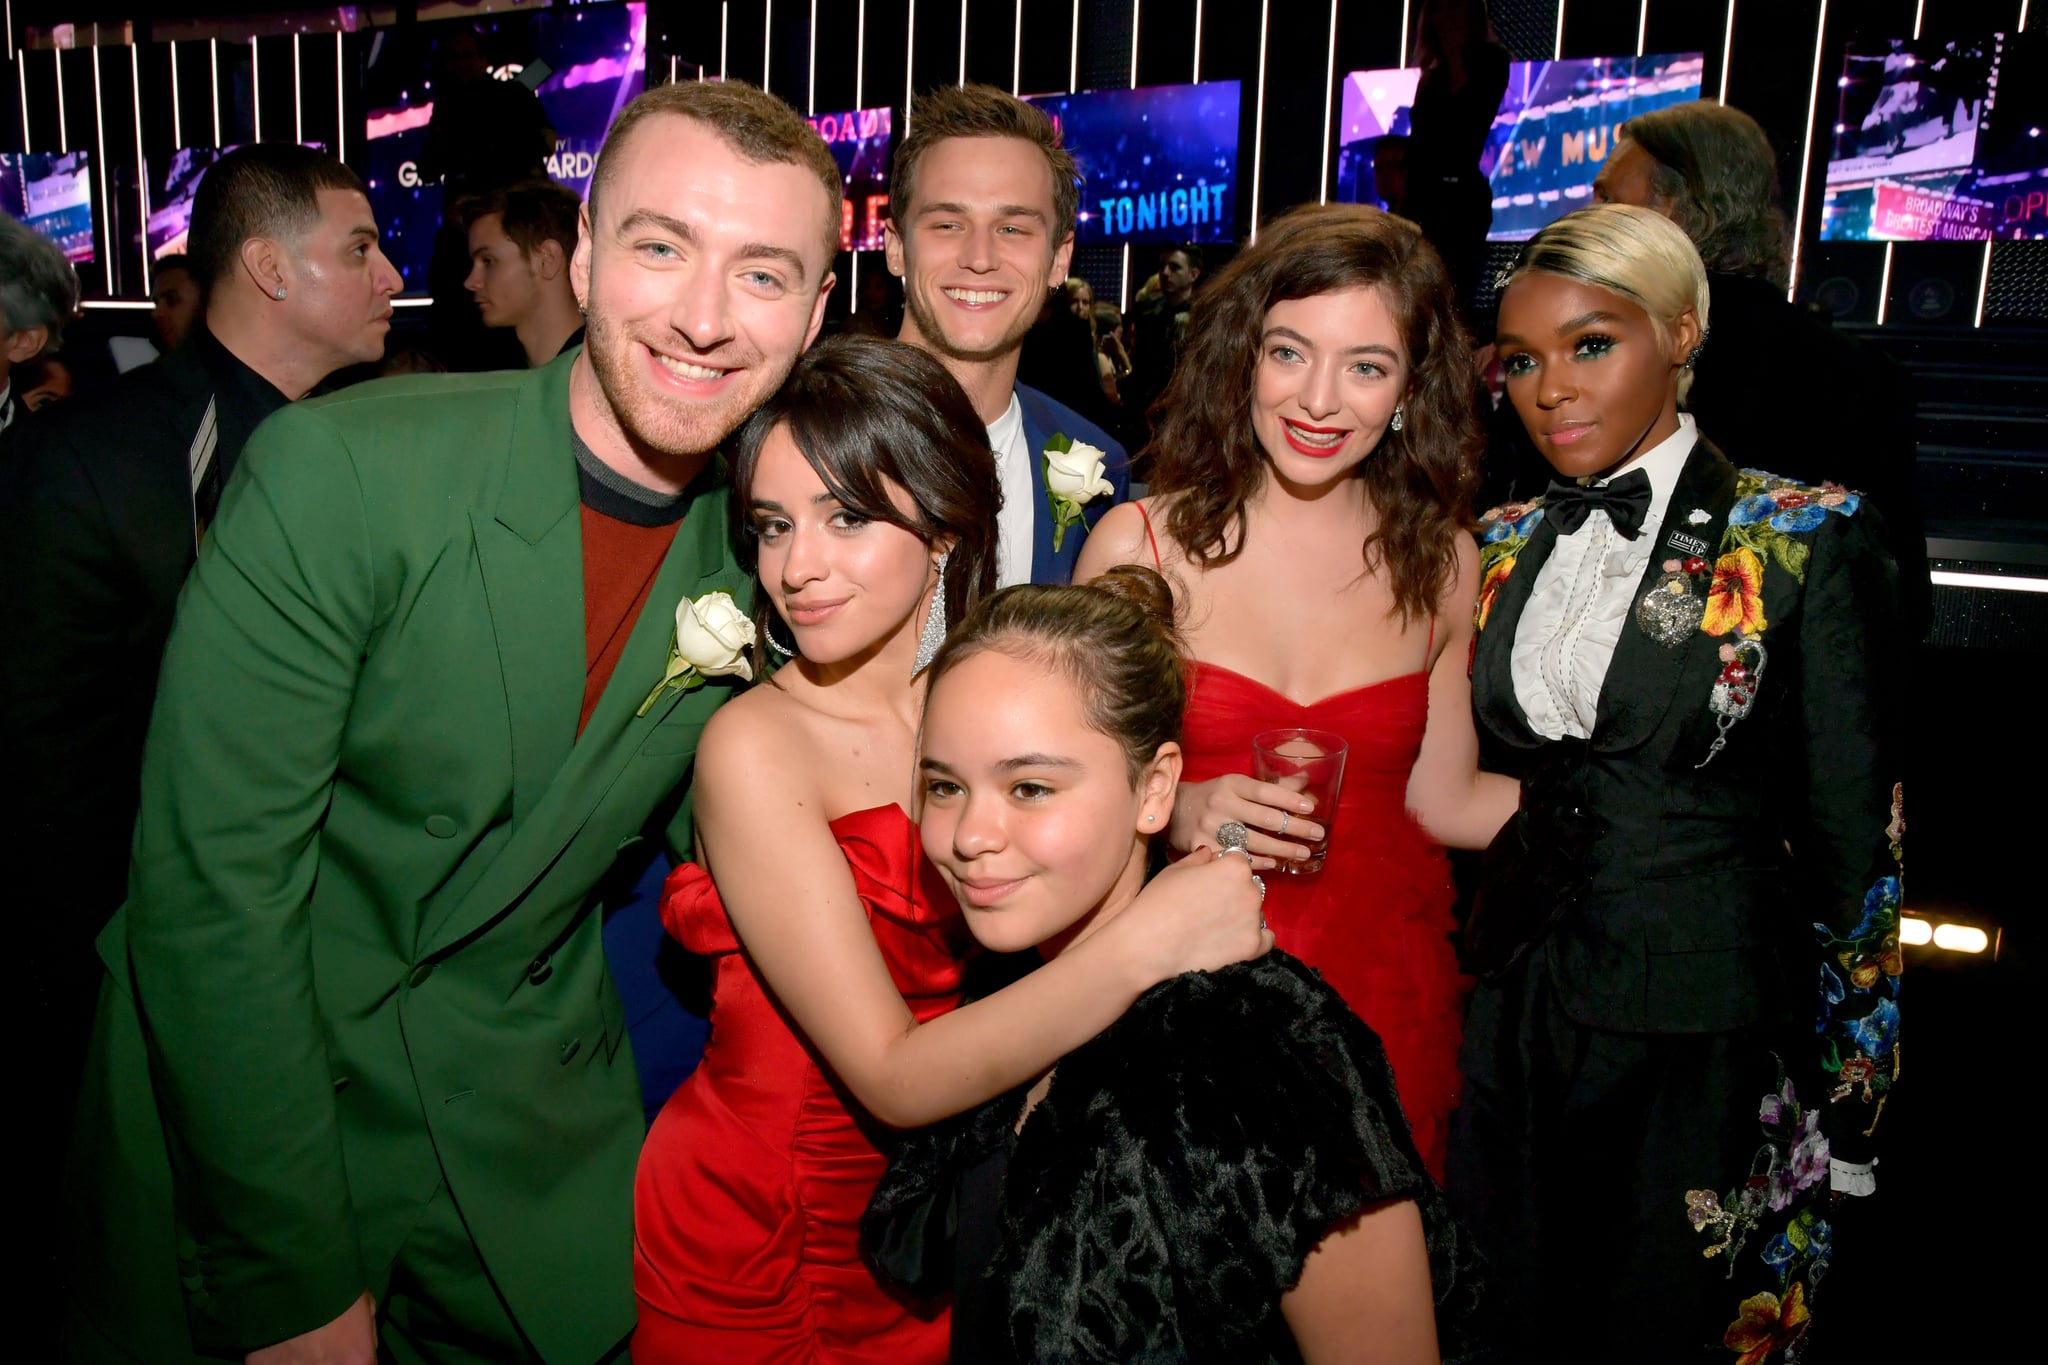 Sam Smith, Camila Cabello, Brandon Flynn, Sofia Cabello, Lorde, and Janelle Monáe posed for a group snap in 2018.